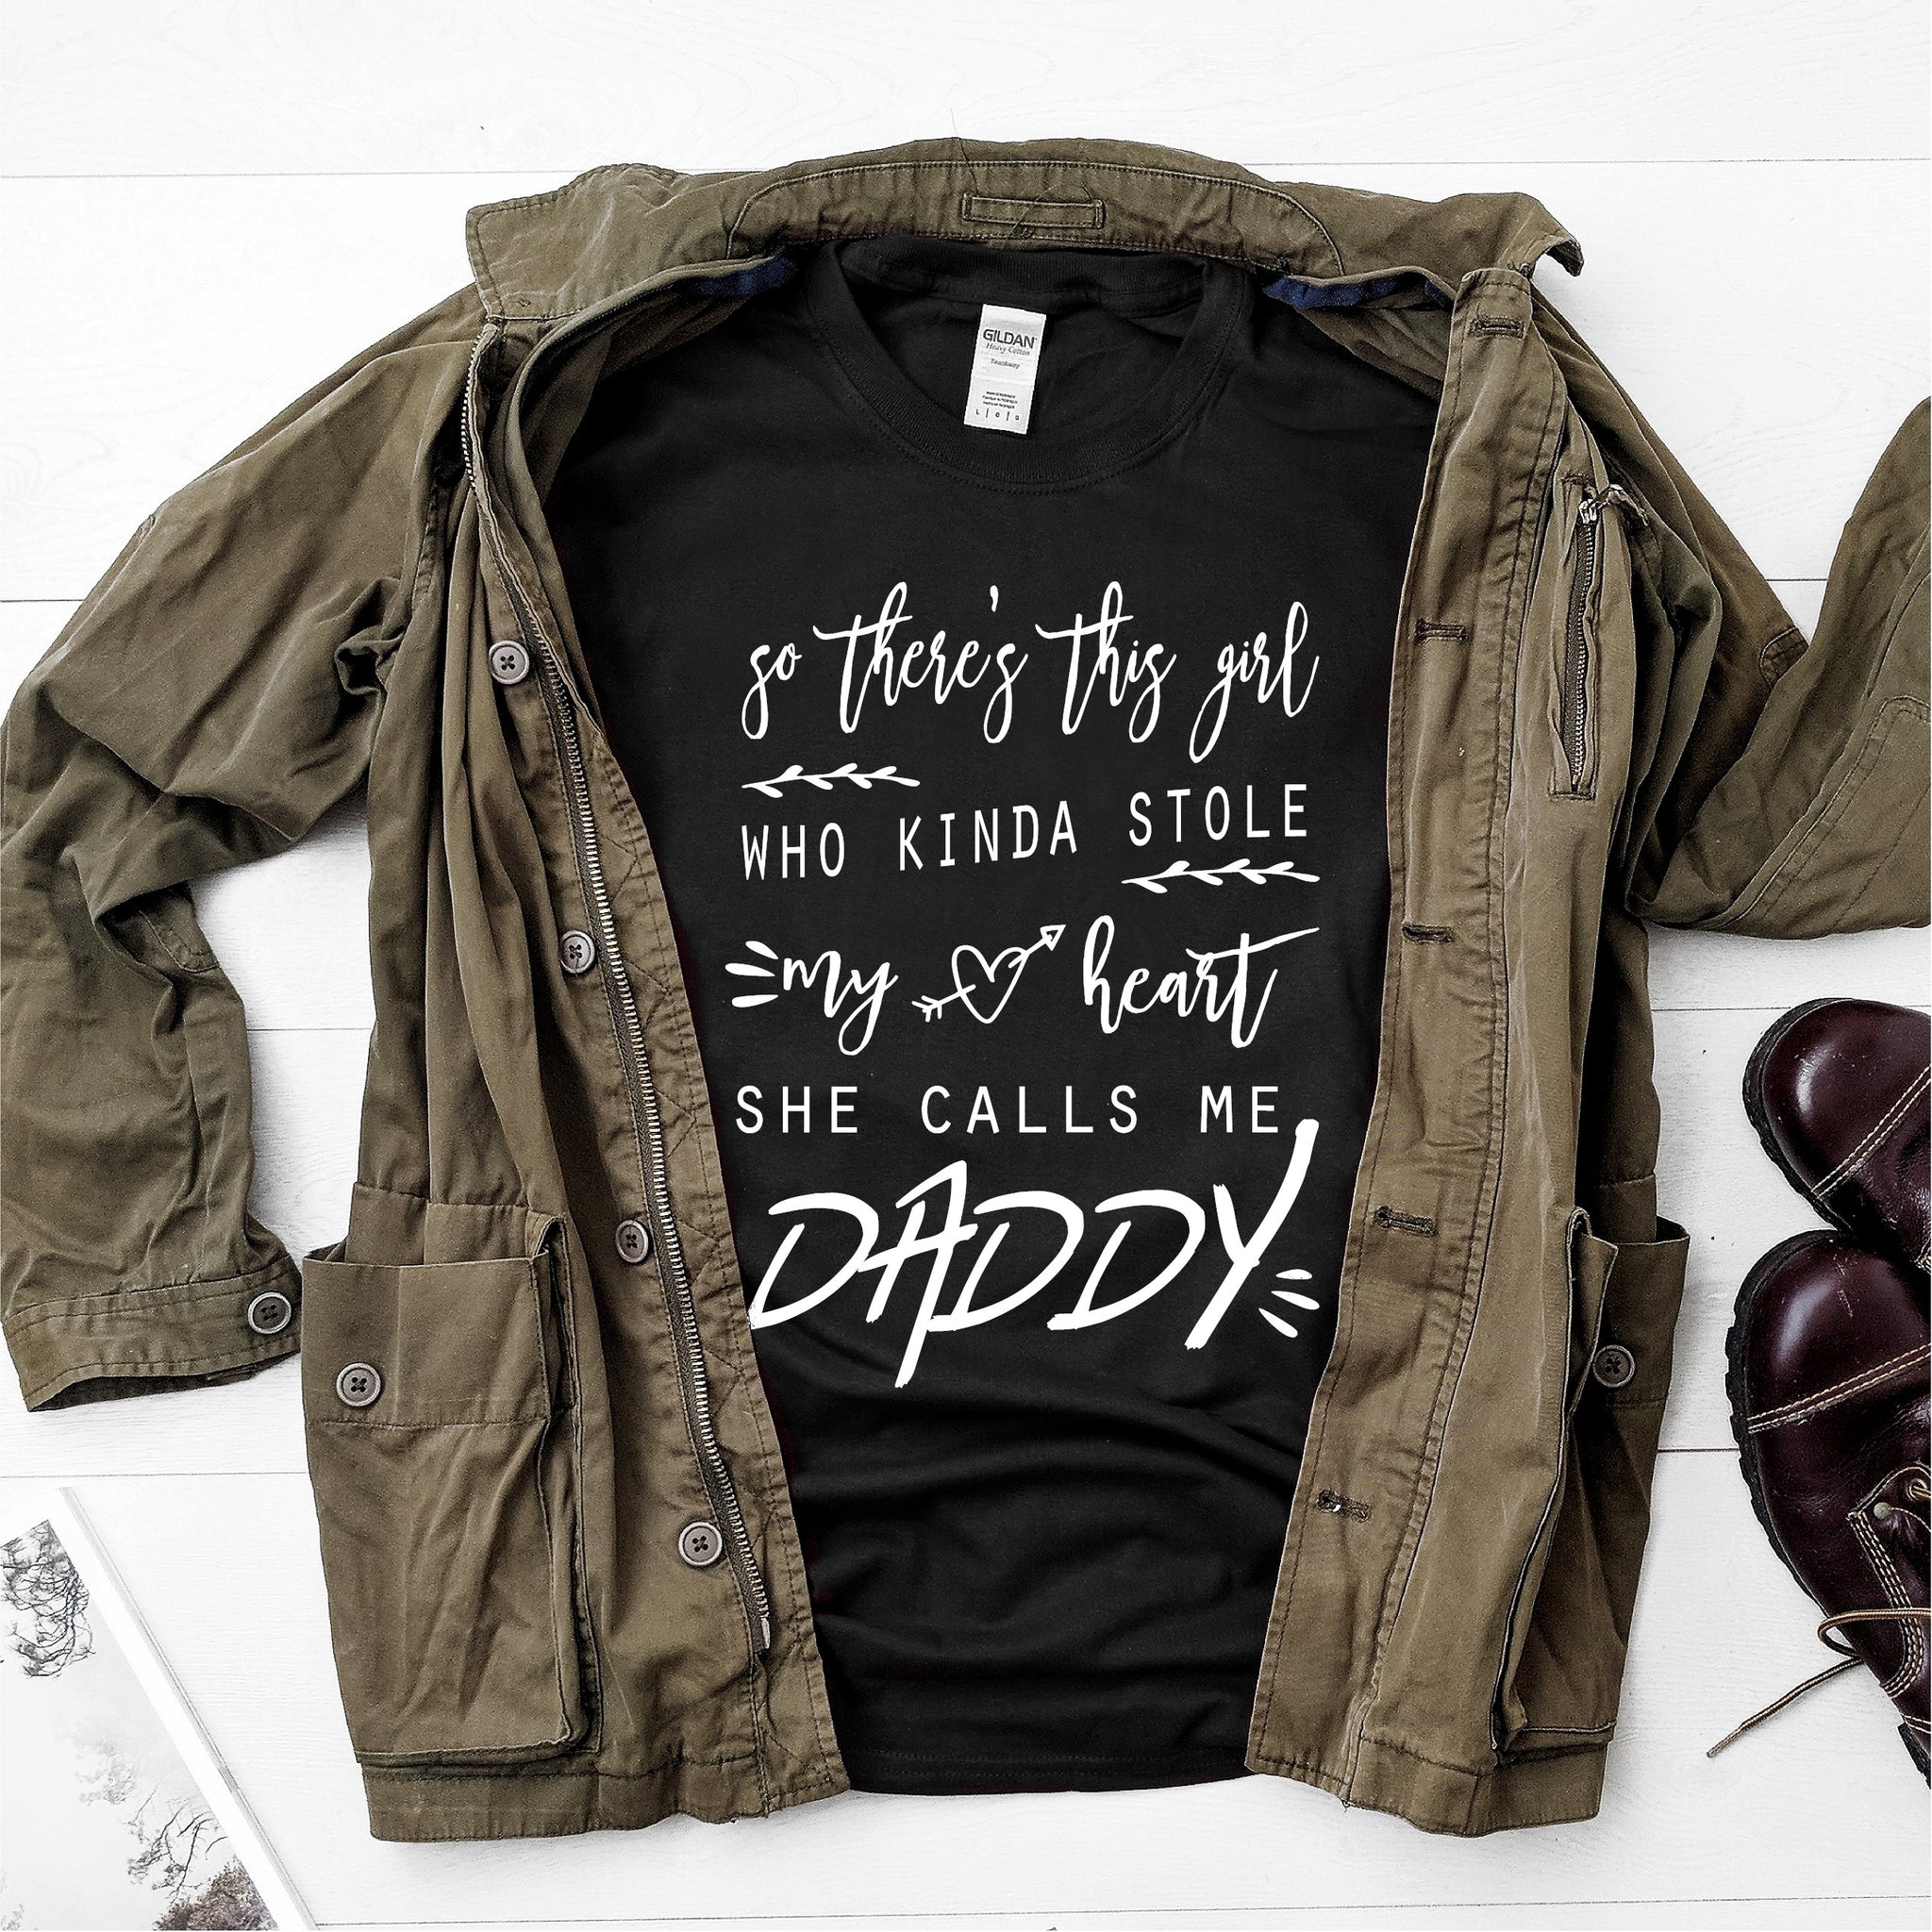 So there's this girl who kinda stole my heart she calls me daddy- Ultra Cotton Short Sleeve T-Shirt - DFHM42